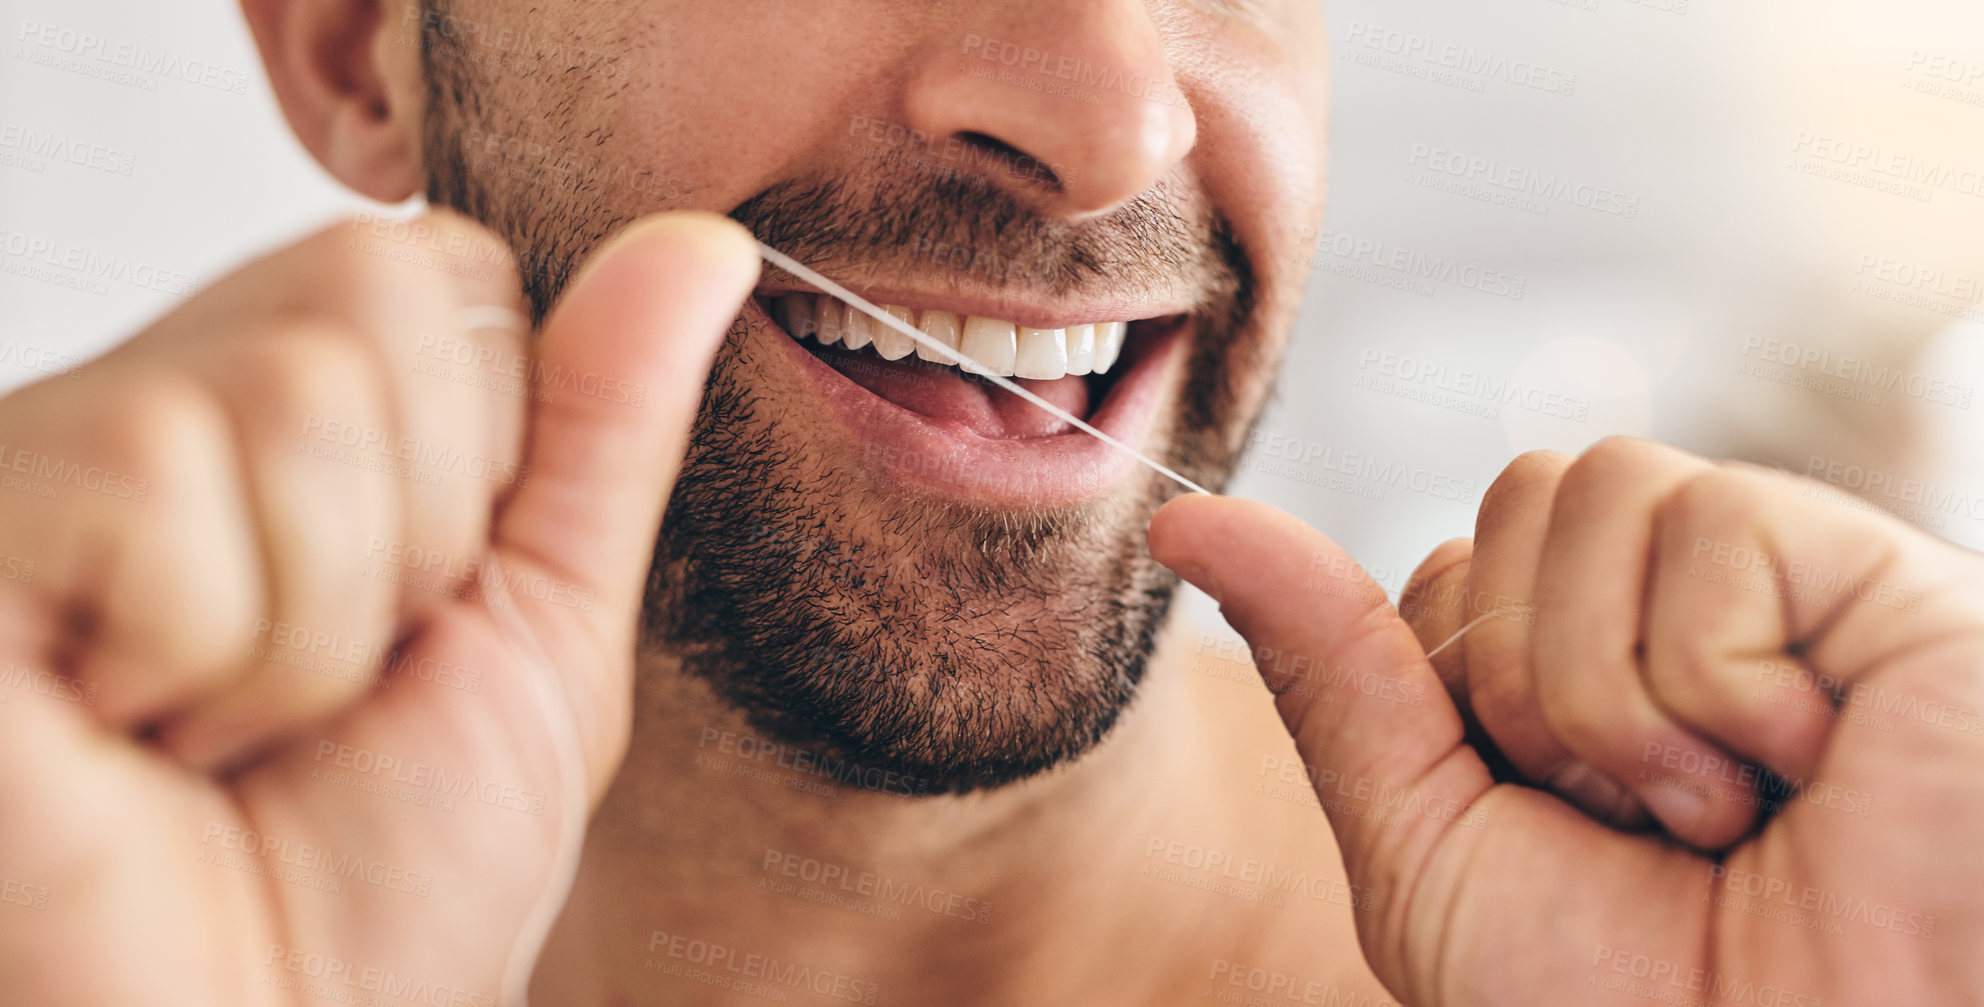 Buy stock photo Closeup, face and man flossing teeth at home for healthy dental wellness, plaque and gingivitis. Happy guy, oral thread or cleaning mouth for fresh breath, tooth hygiene and habit to care for smile